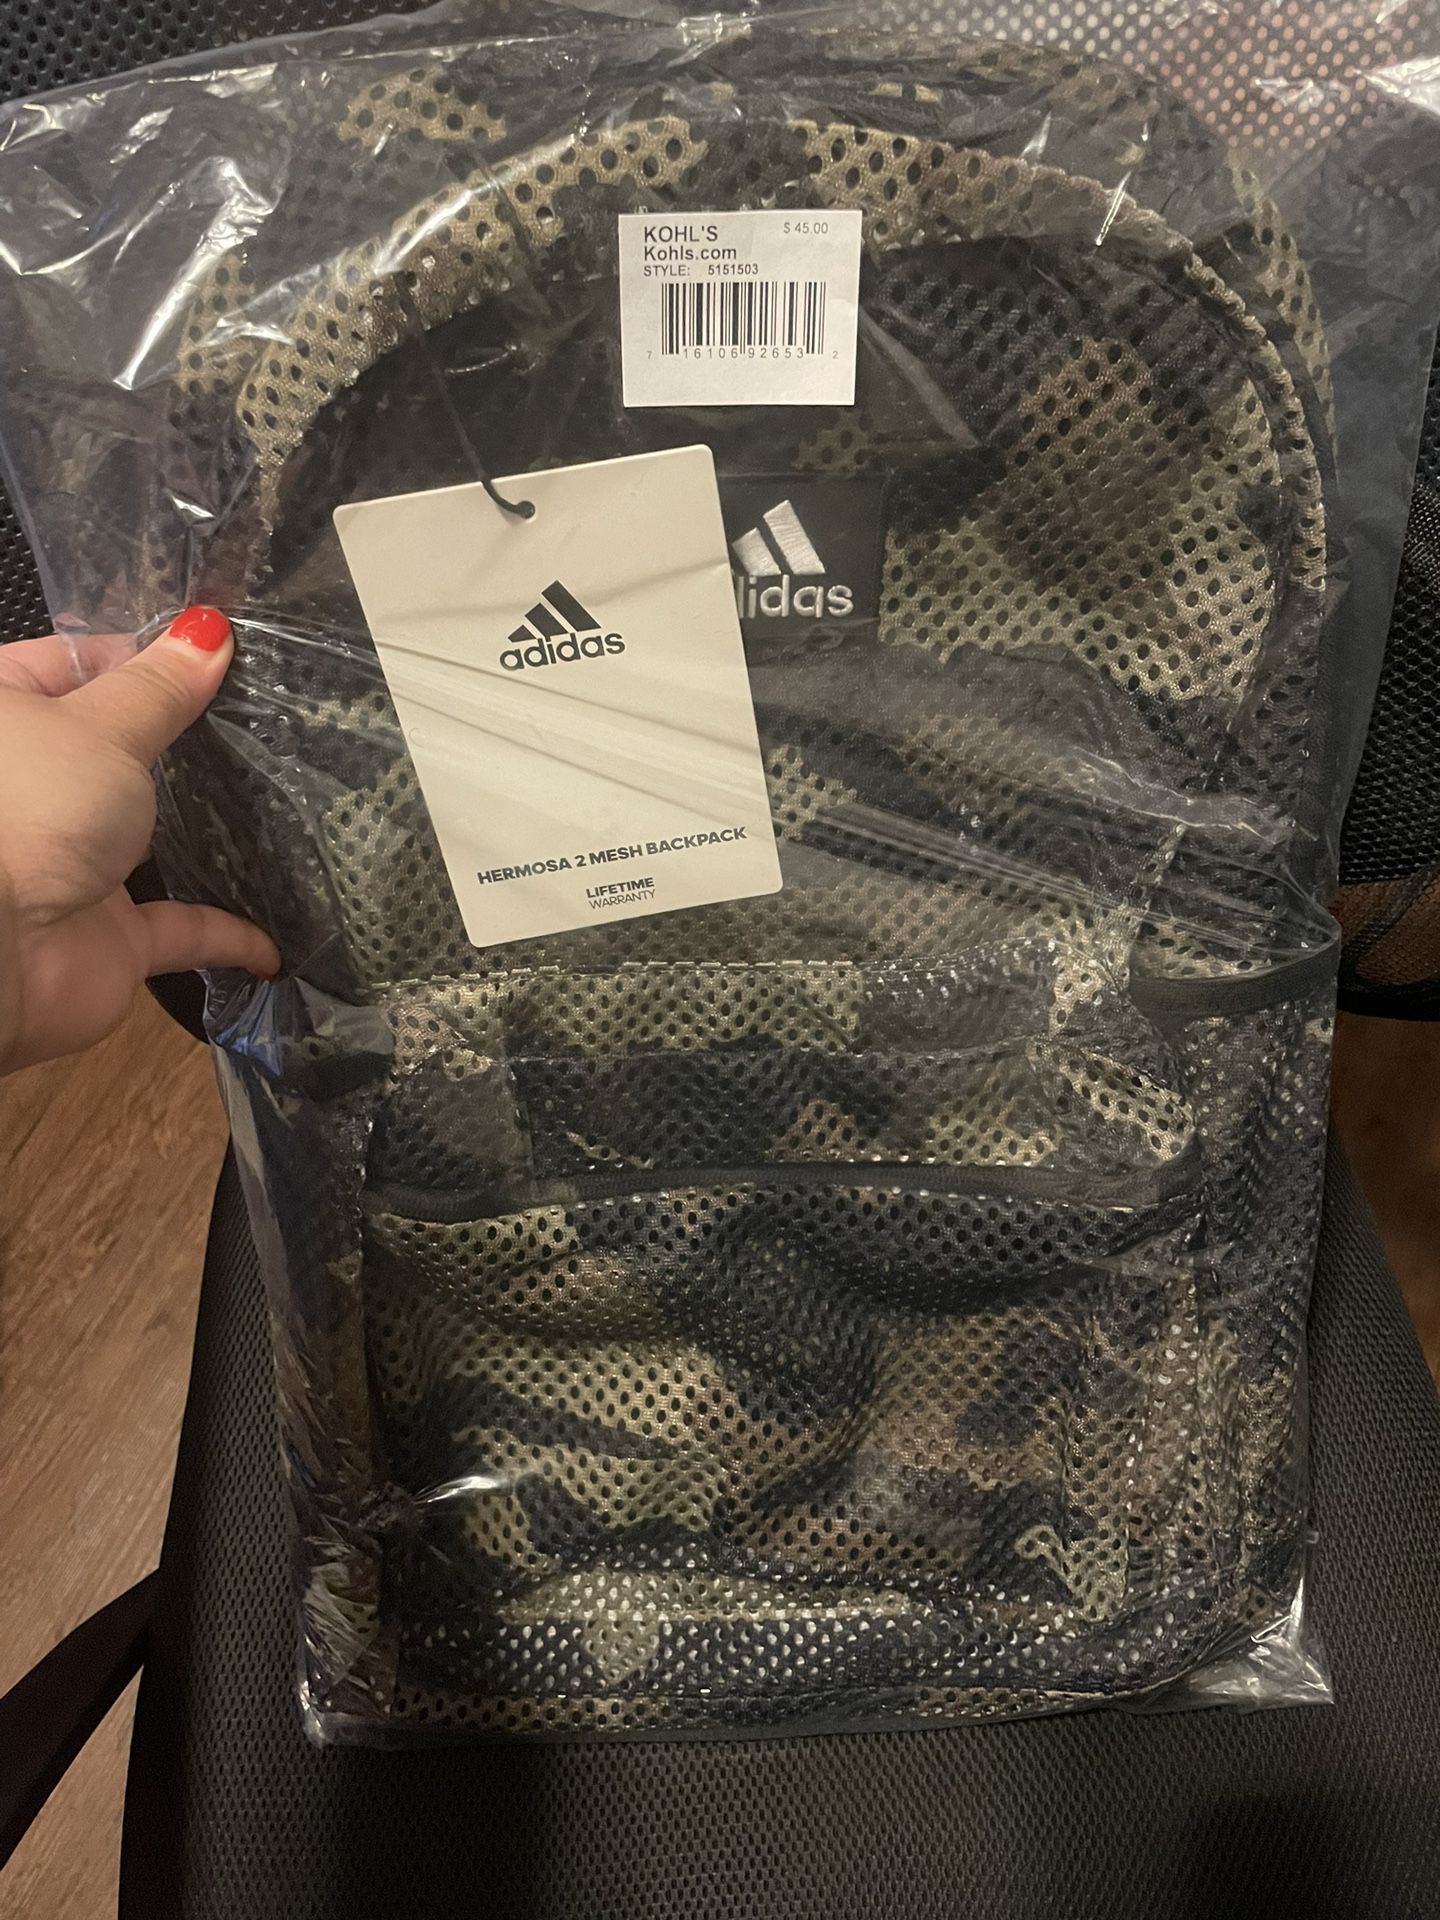 VALENTINE’S DAY SALE-Adidas Camo Mesh Backpack $30 Obo